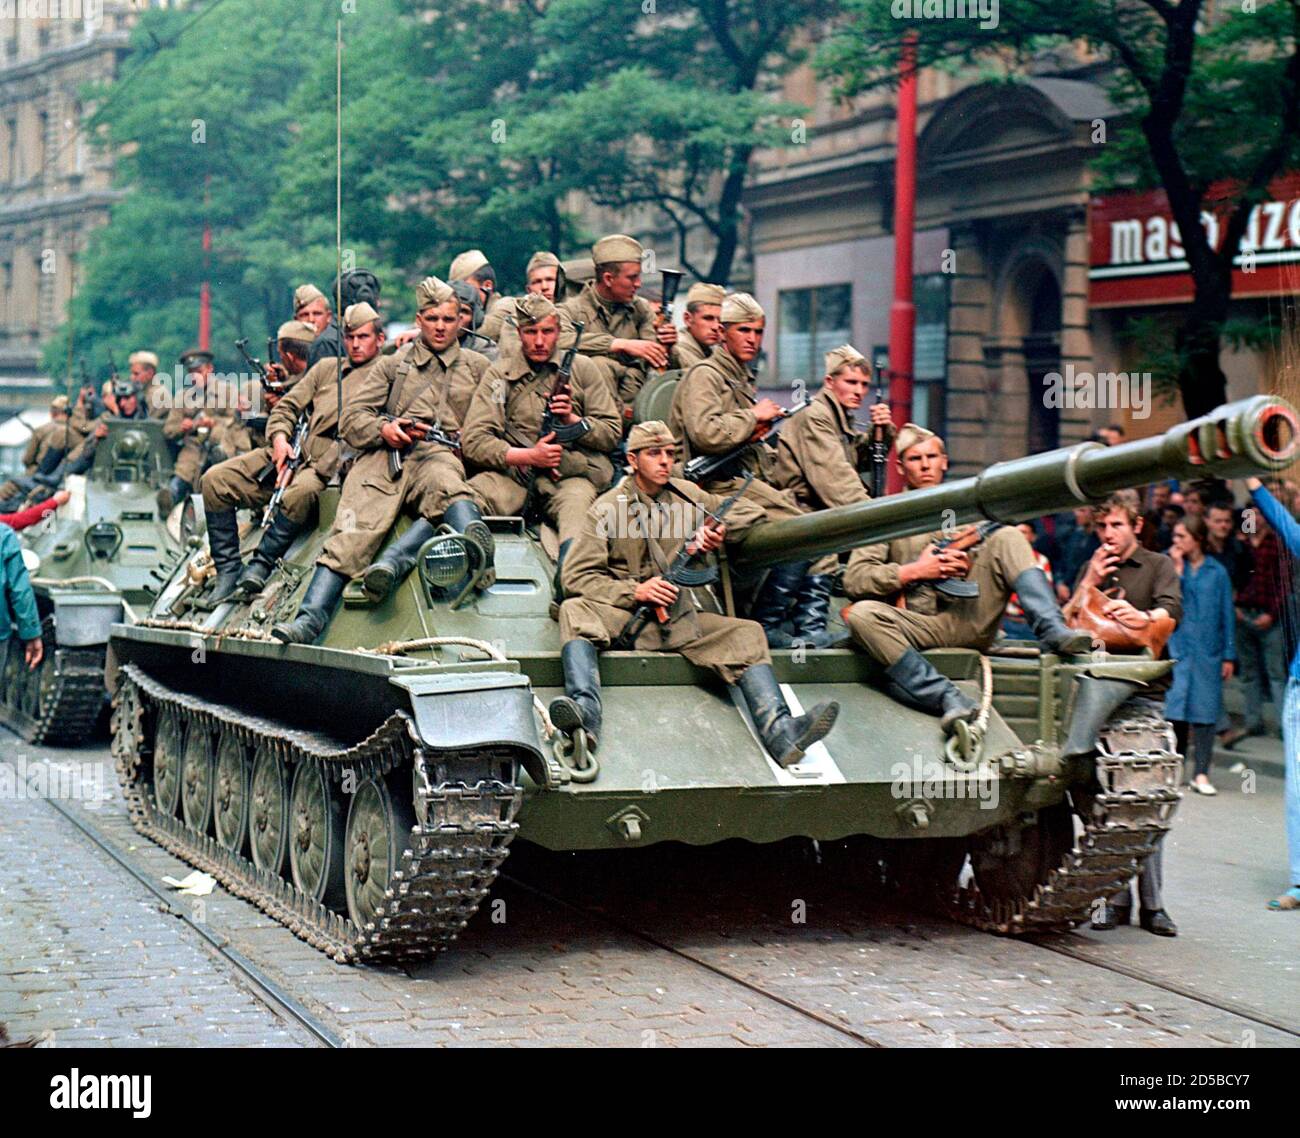 soviet-army-soldiers-sit-on-their-tanks-in-front-of-the-czechoslovak-radio-station-building-in-central-prague-during-the-first-day-of-soviet-led-invasion-to-then-czechoslovakia-august-21-1968-vera-machutova-woke-one-august-night-in-1968-to-the-thunder-of-soviet-tanks-surging-through-this-czech-city-on-the-east-german-frontier-forty-years-later-with-the-czech-republic-now-a-democracy-within-nato-and-the-european-union-machutova-is-troubled-by-the-conflict-in-georgia-whose-army-was-routed-last-week-by-russian-forces-that-pushed-deep-inside-its-territory-picture-taken-august-21-1968-to-m-2d5bcy7.jpg